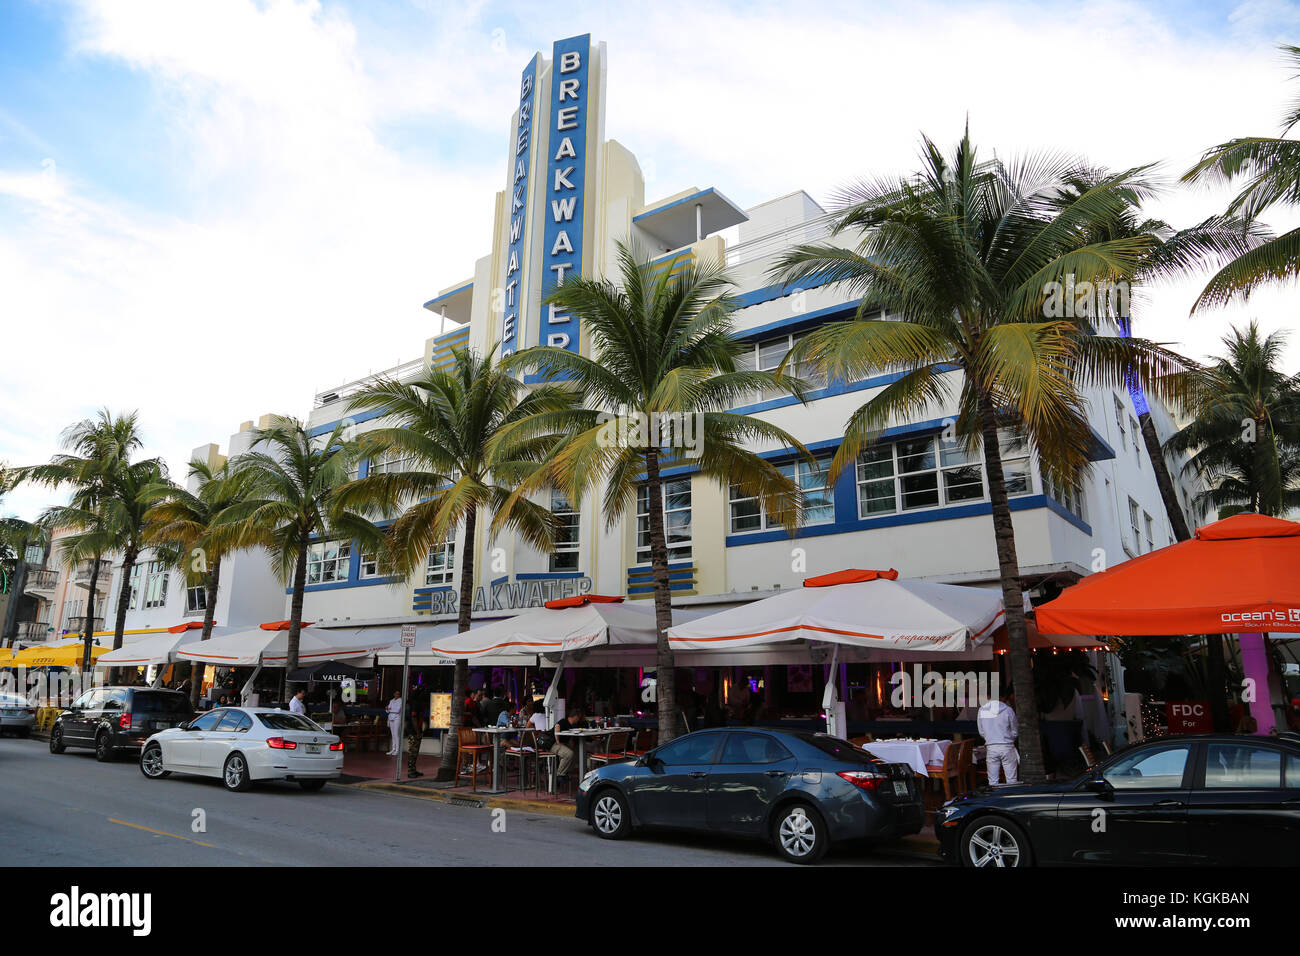 View of the Breakwater Hotel, an Art Deco building on Ocean Drive in South Beach, Miami, Florida, USA, with palm trees lining the front. Stock Photo